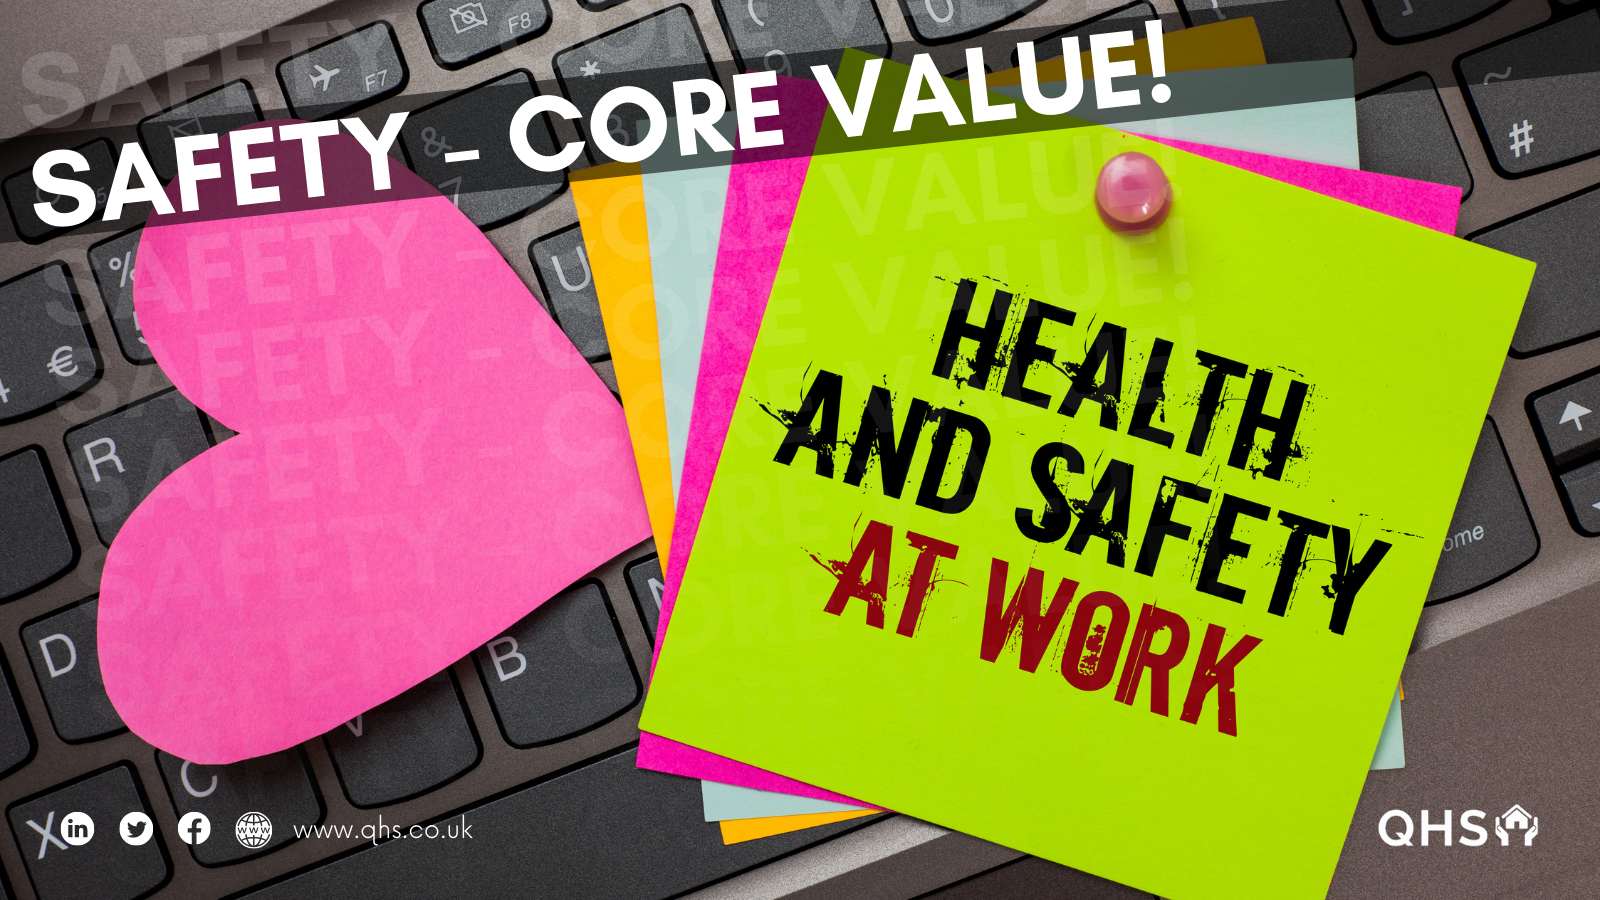 Why Safety is 1 of QHS's 3 Core Values